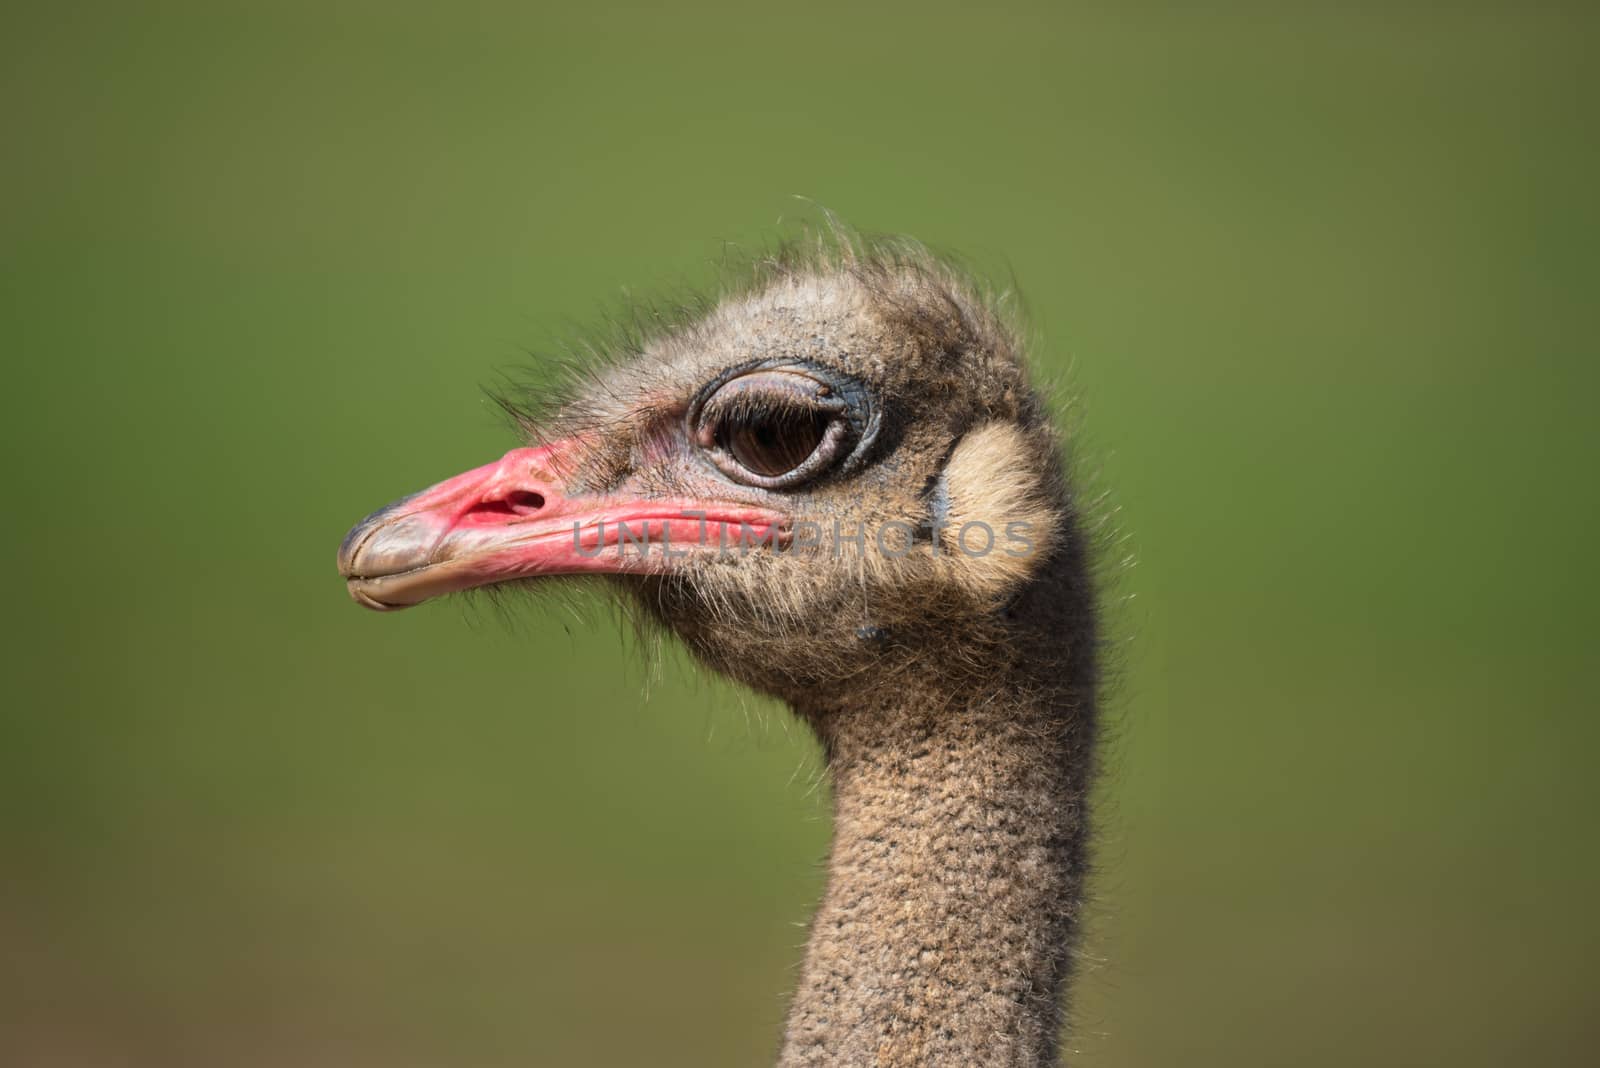 Close up view of an Ostrich on nice blurred background by HERRAEZ